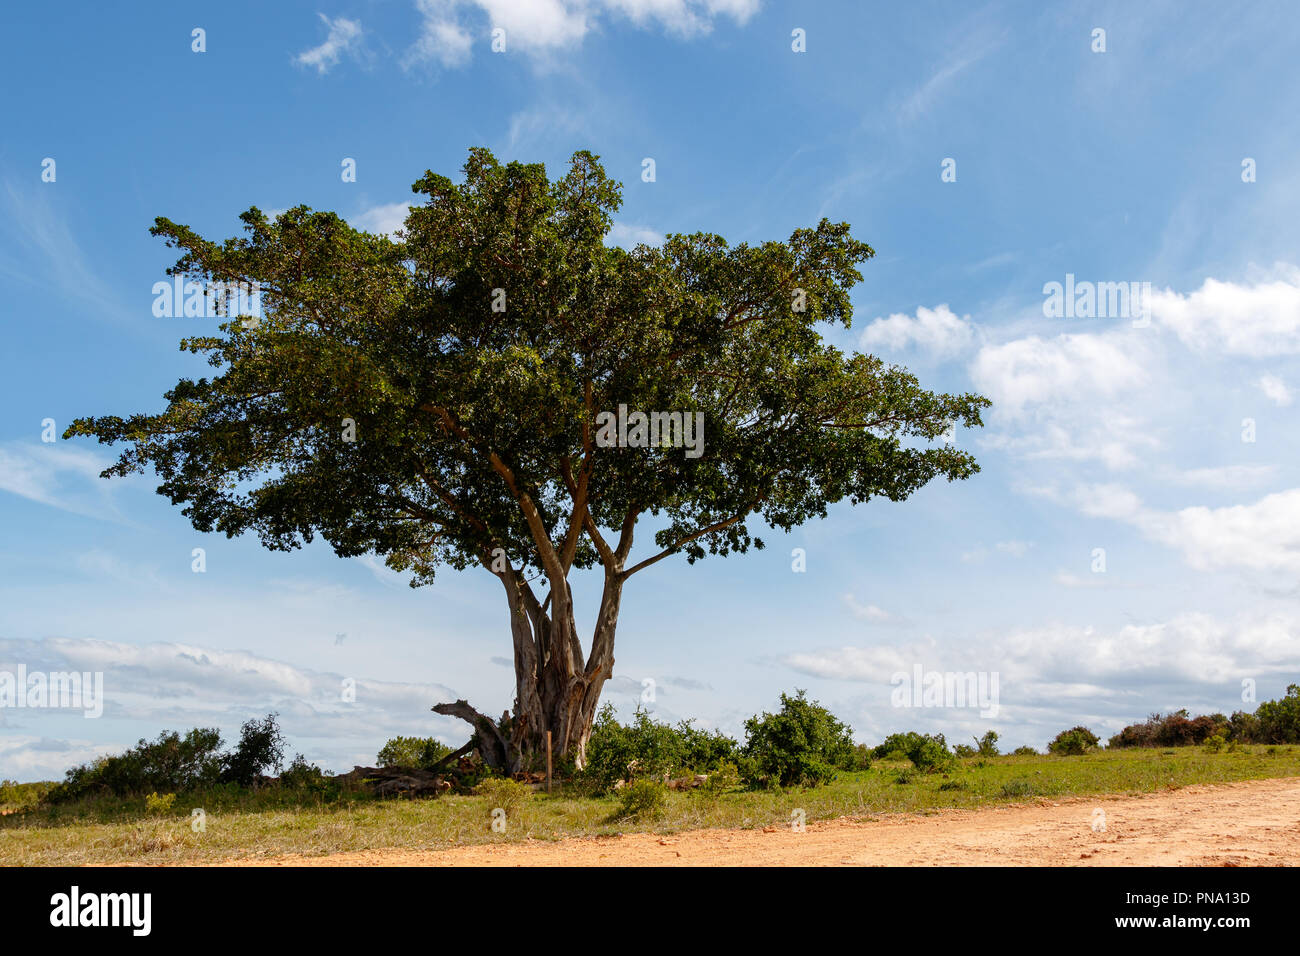 Full grown tree on the dusty gravel road on a cloudy day Stock Photo